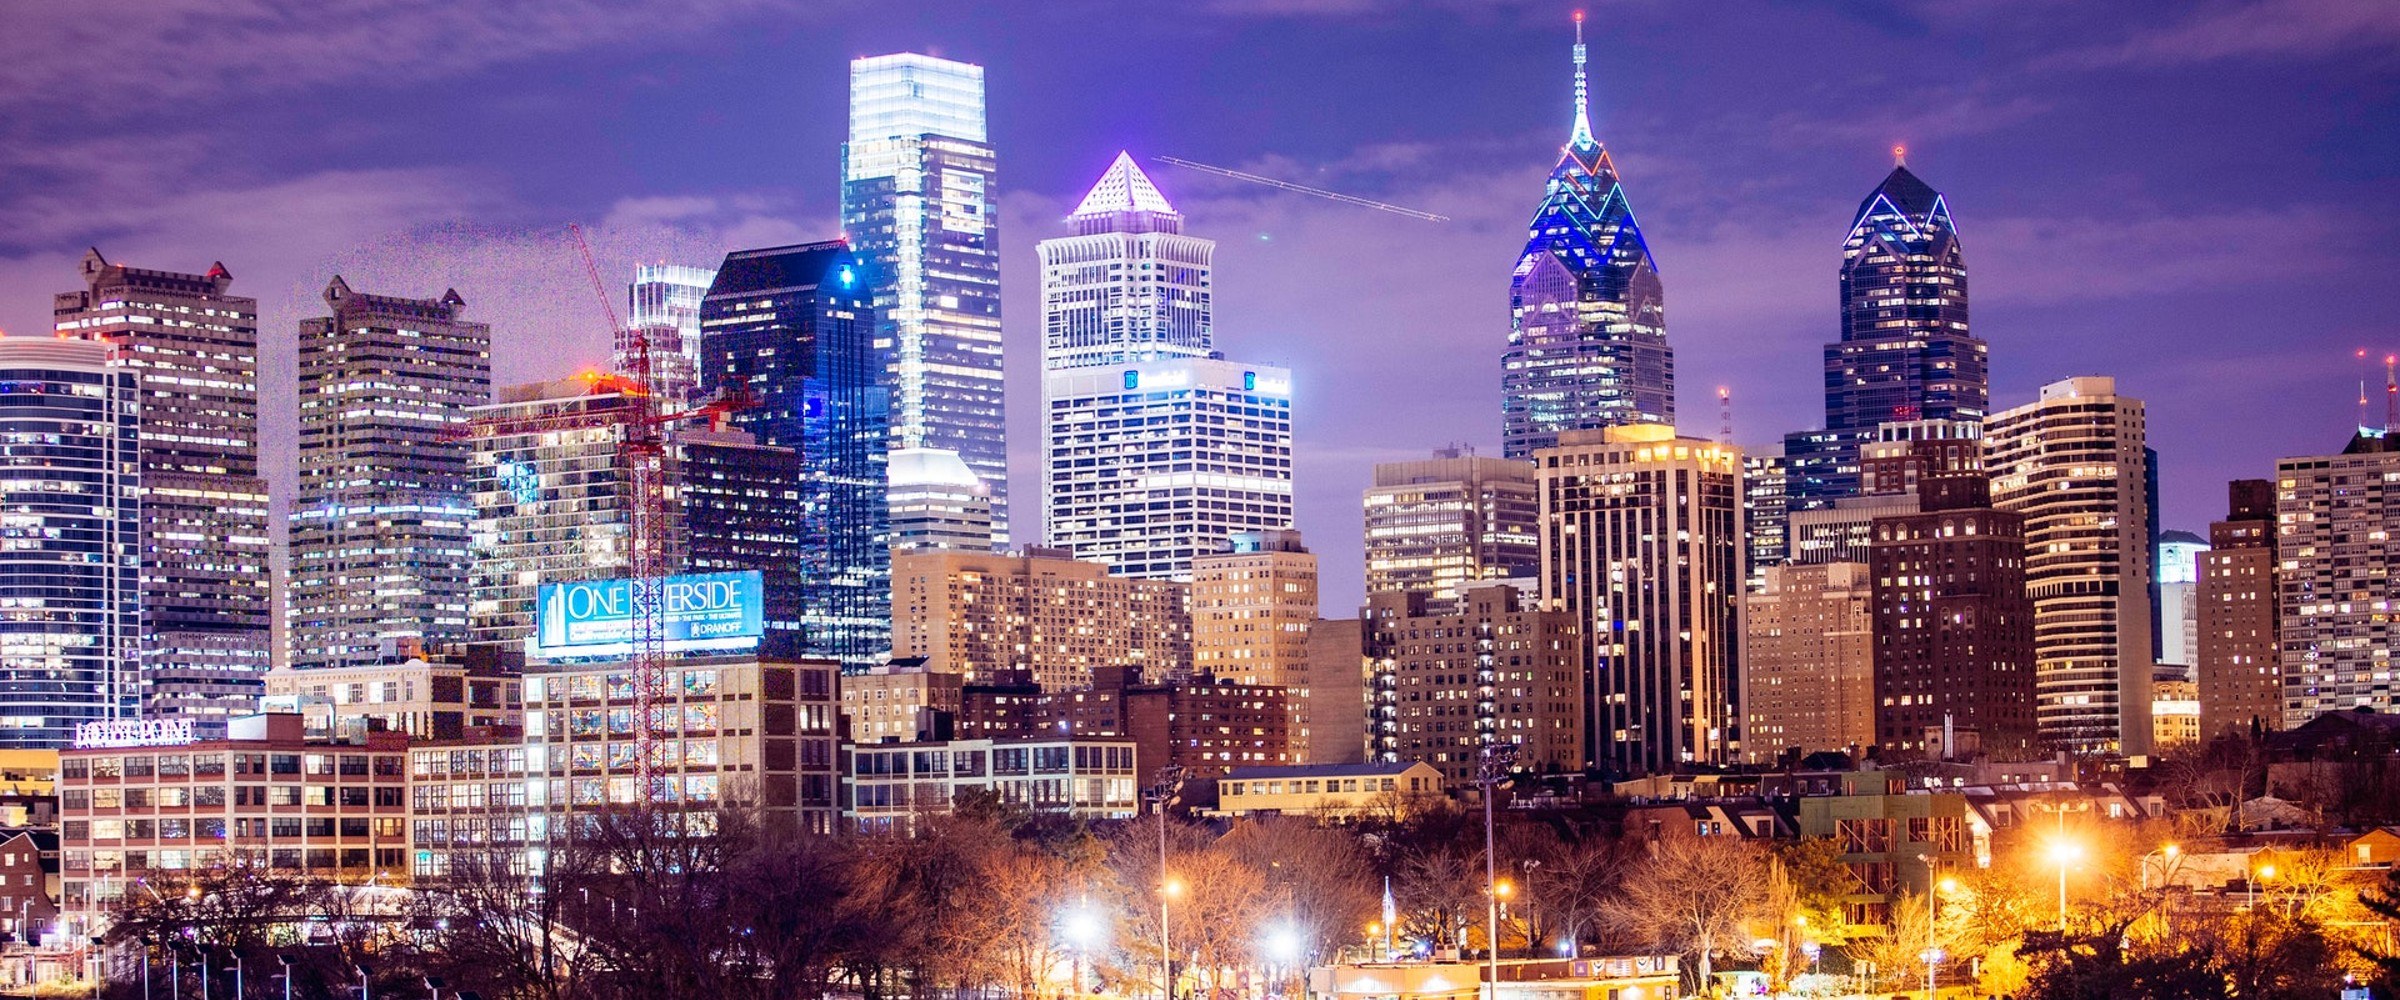 property taxes rising in the city of Philadelphia skyline